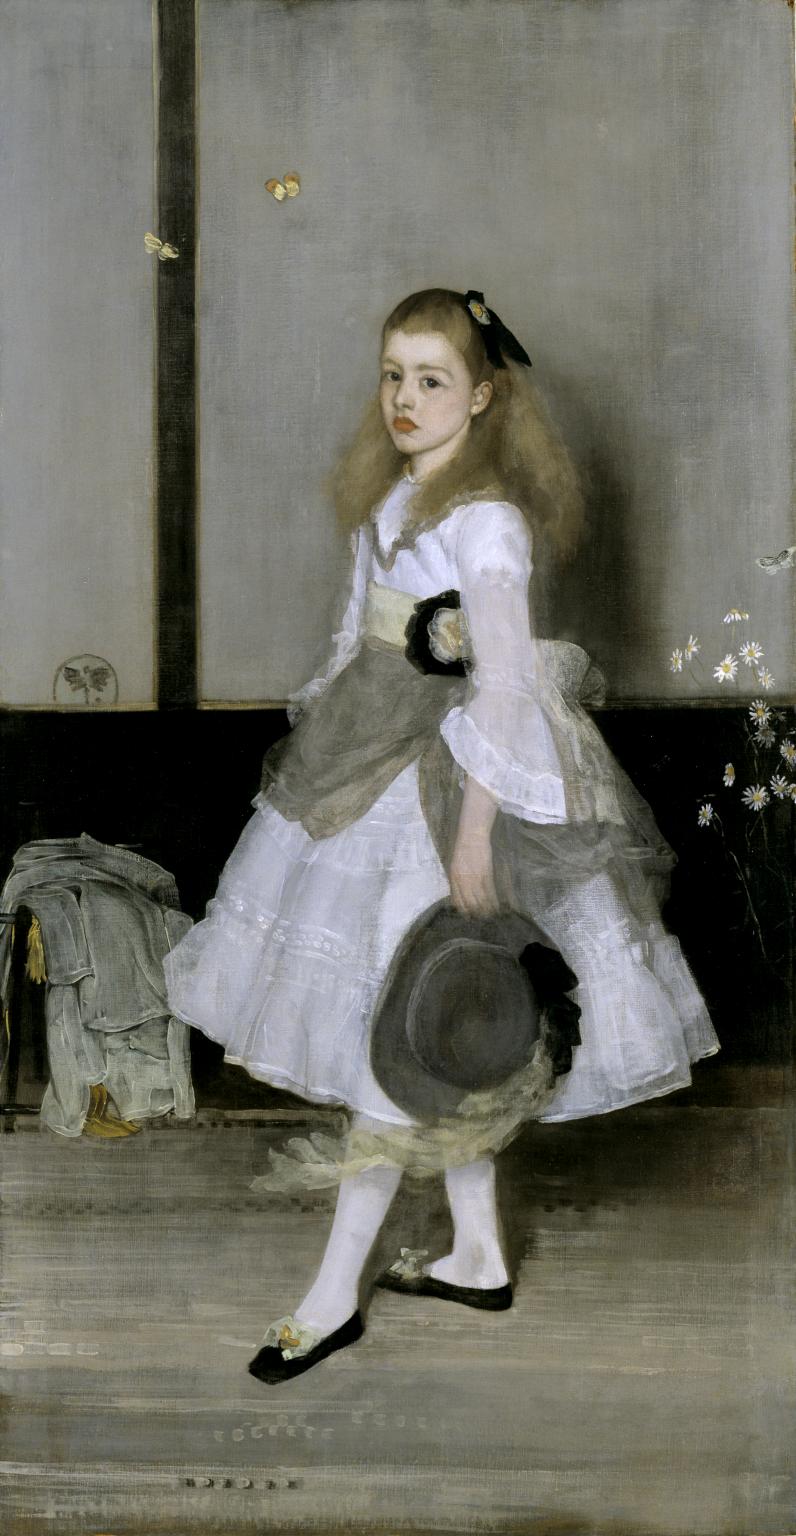 Harmony in grey and green: miss cicely alexander 1872-4 by james abbott mcneill whistler 1834-1903